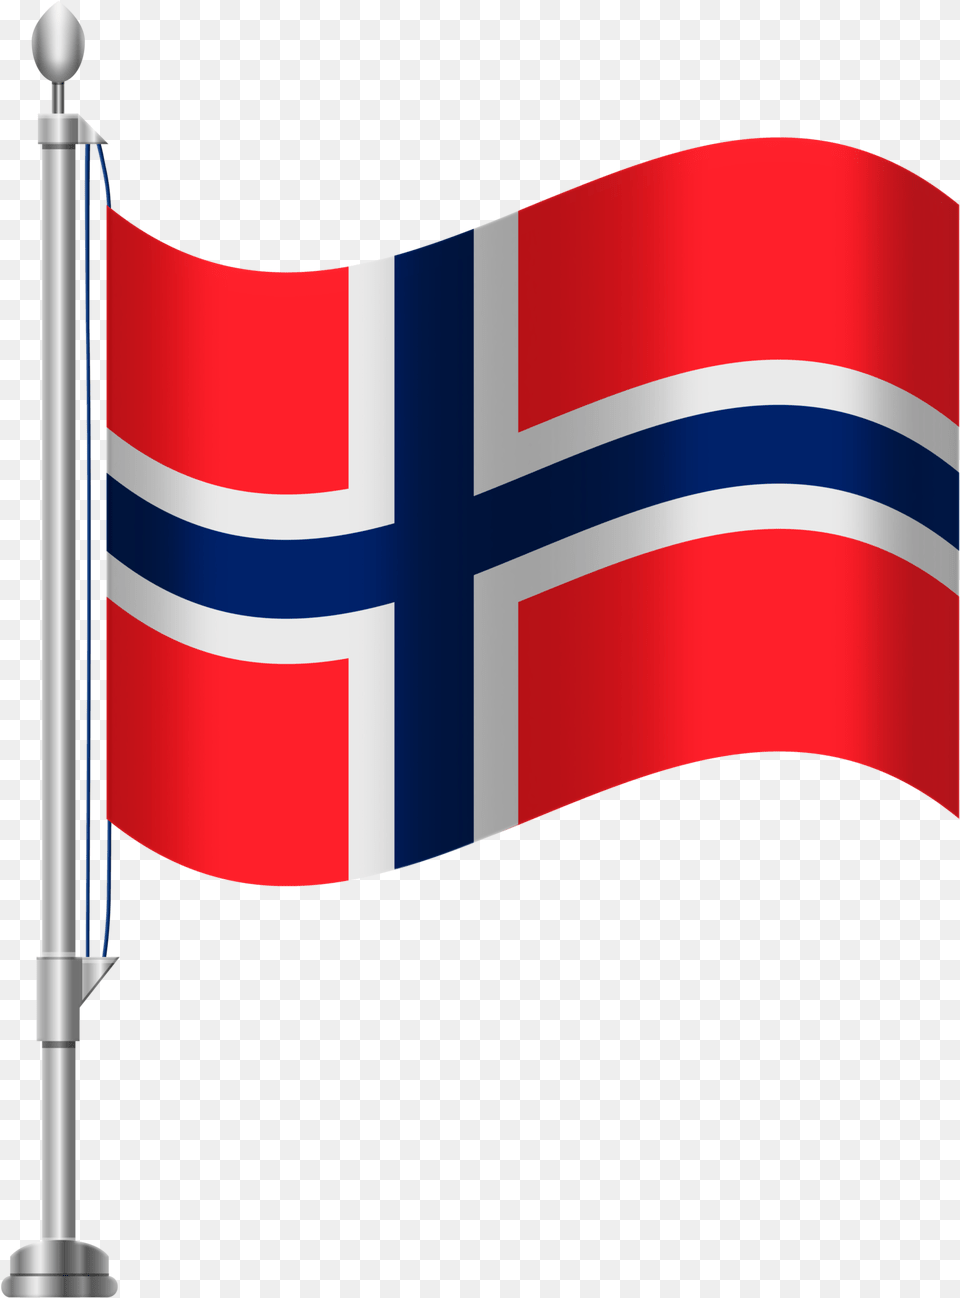 Norway Flag Clip Art Puerto Rican Flag Clipart, Norway Flag, Dynamite, Weapon Free Png